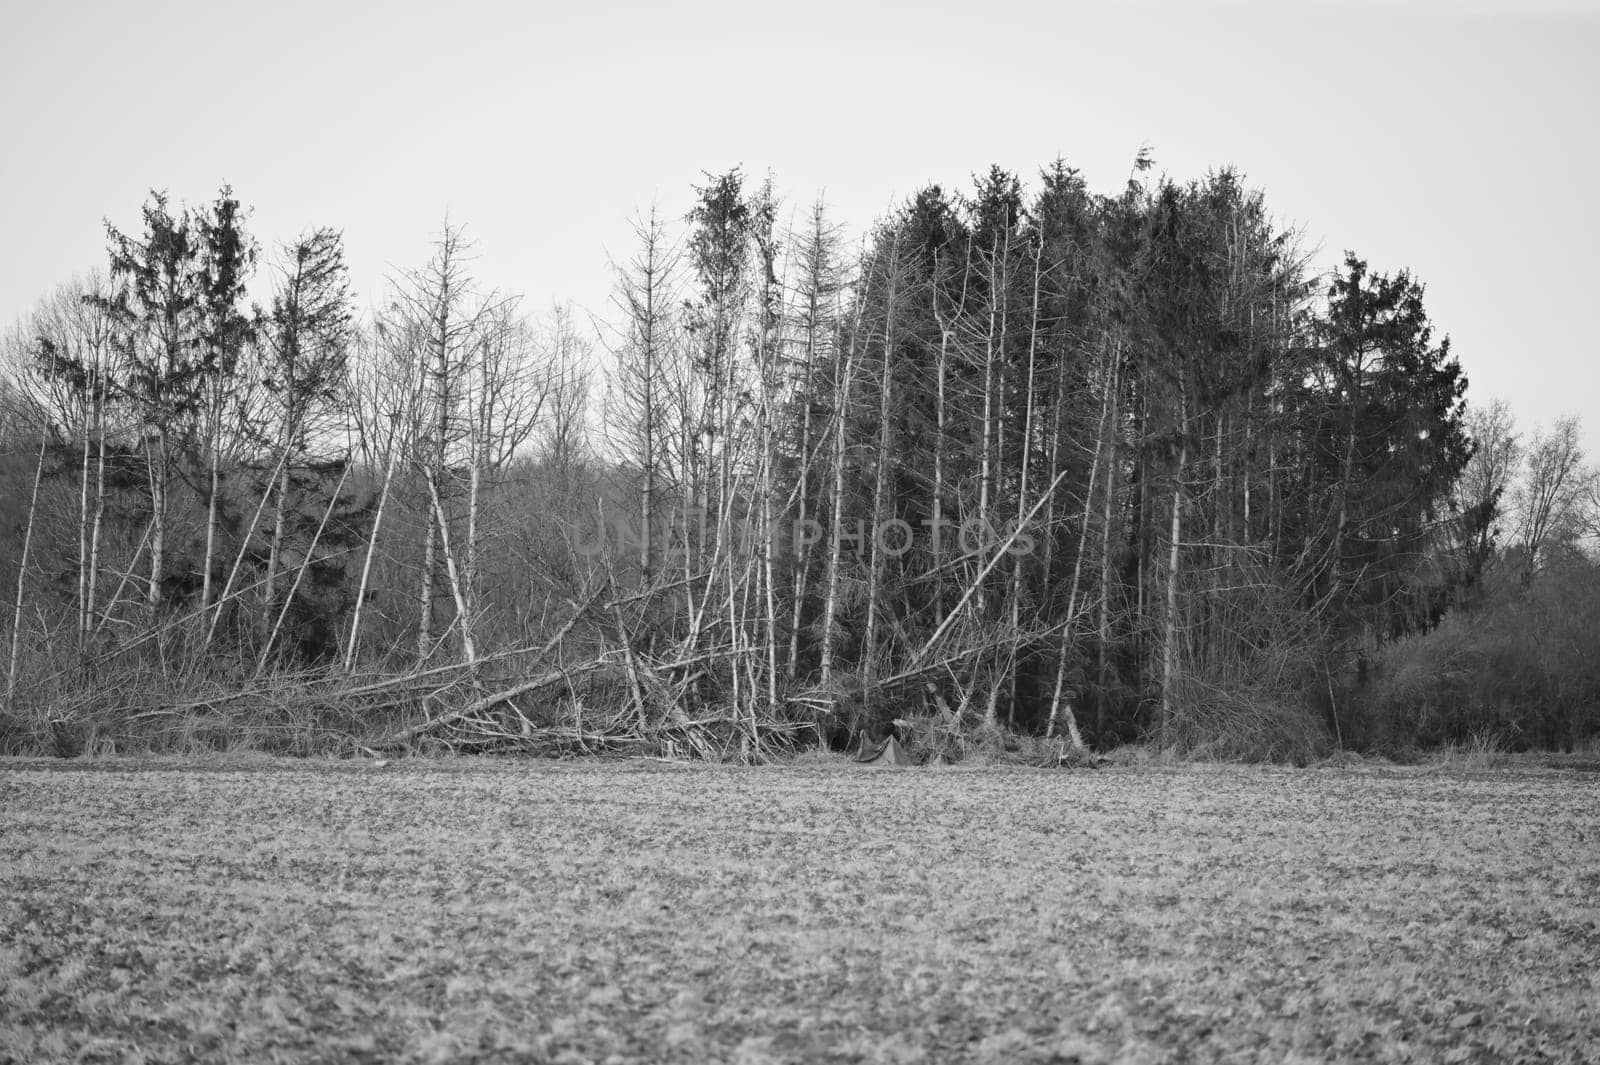 Dead trees at the edge of the field, black and white, Meerbusch, Germany by rherrmannde